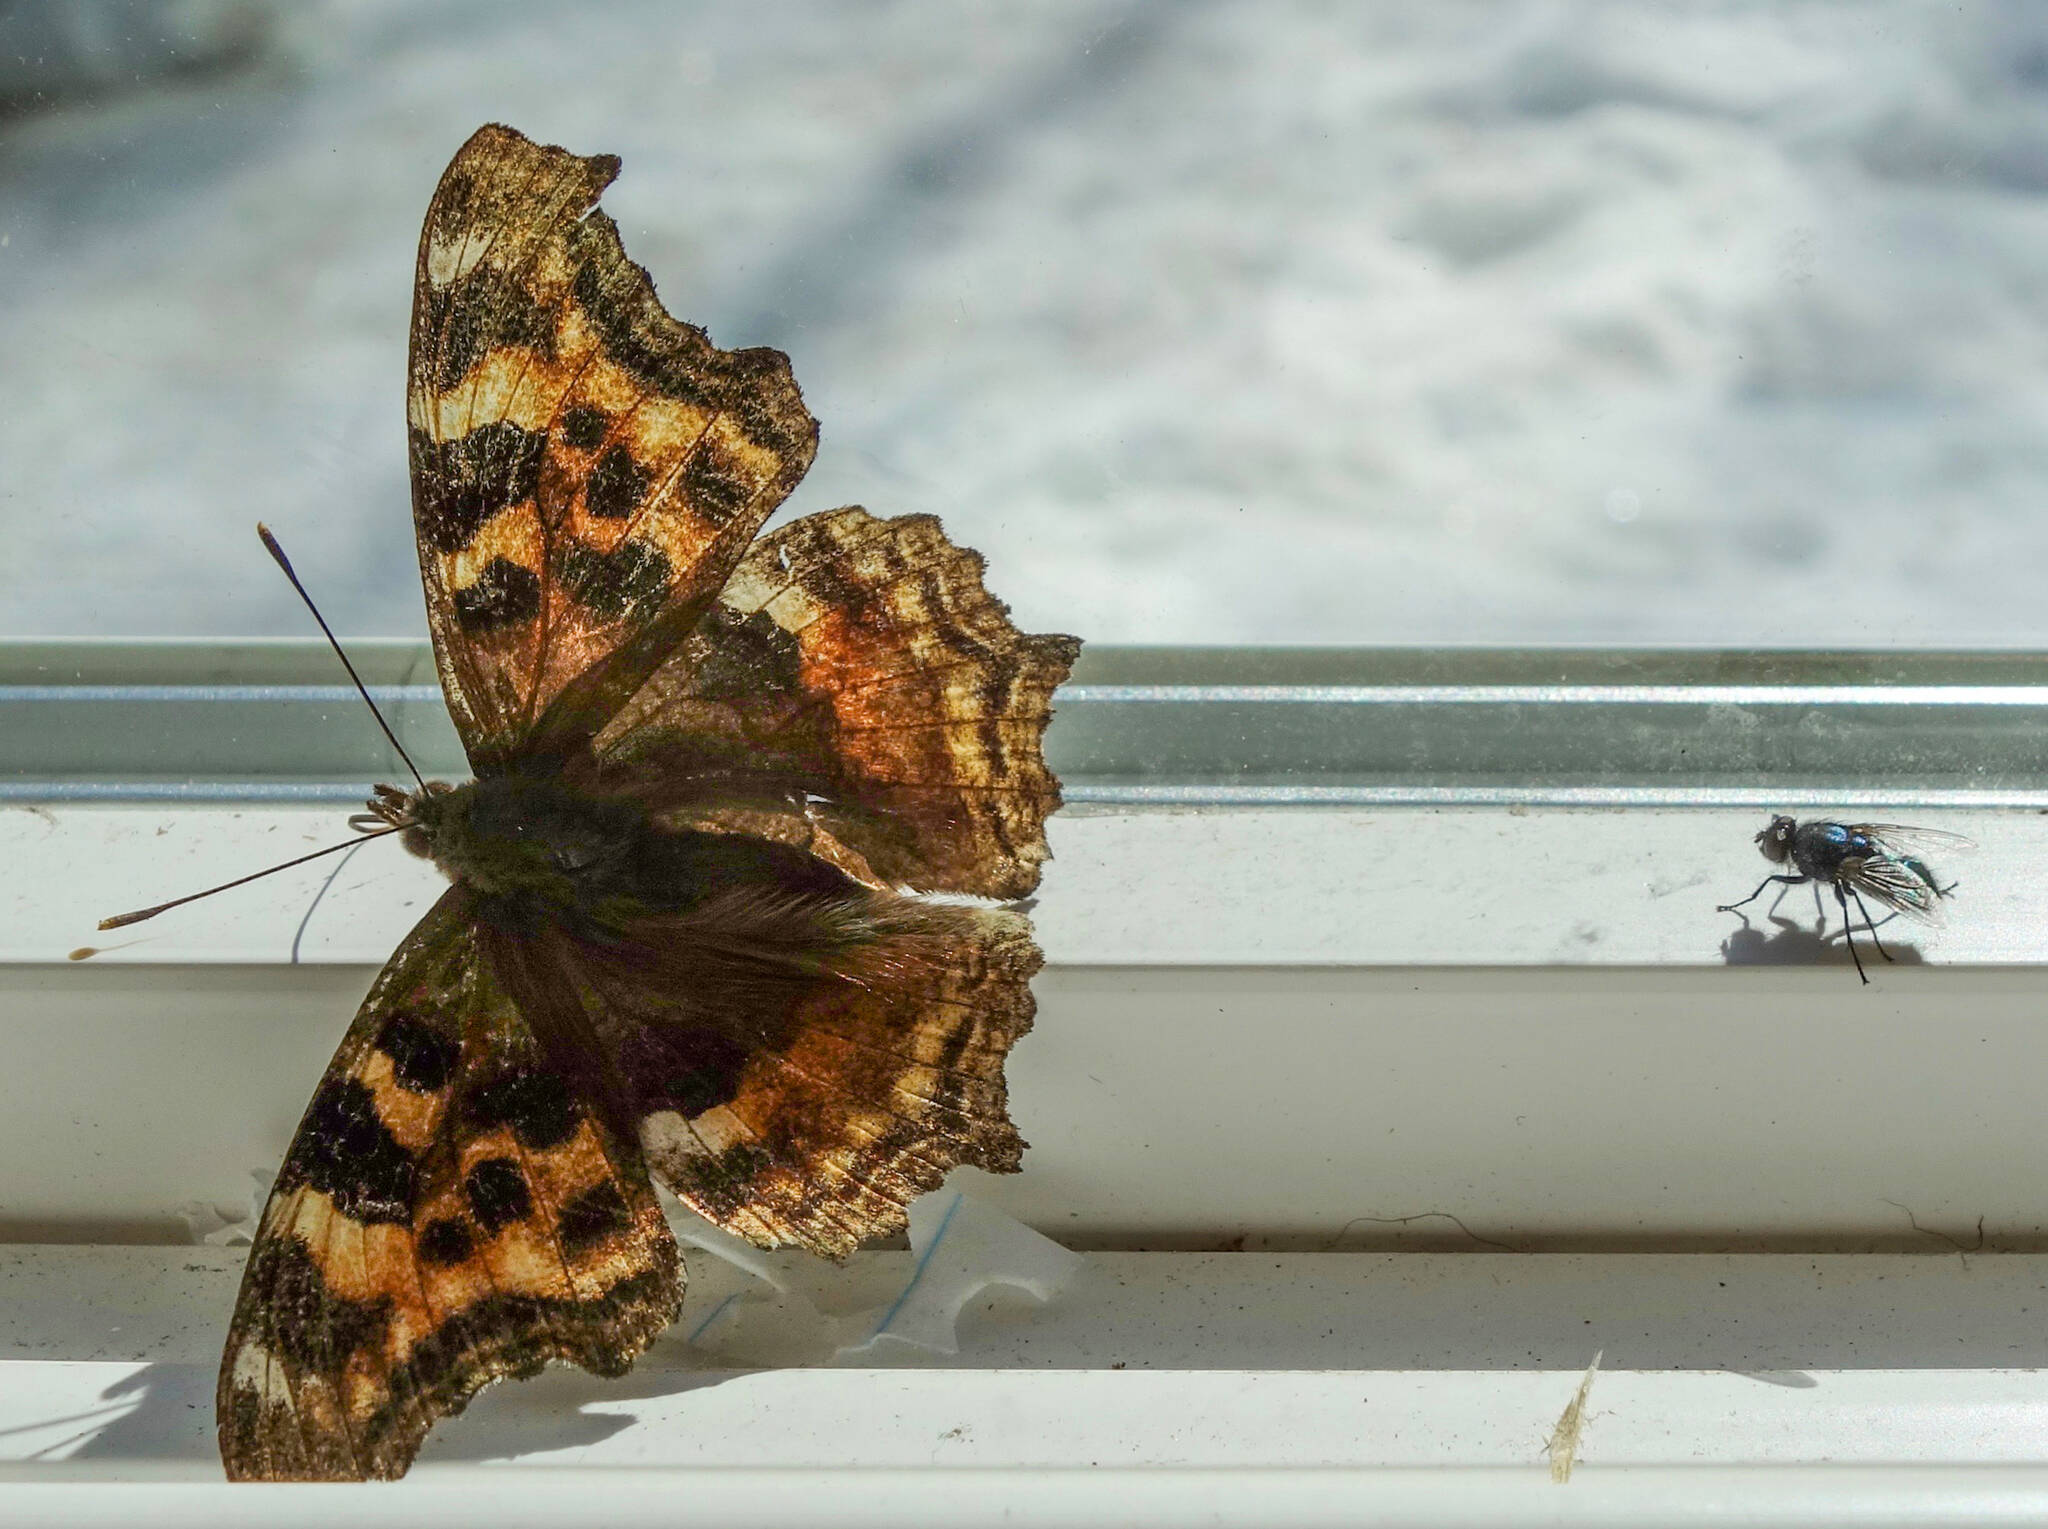 A Compton tortoiseshell butterfly emerges from winter hibernation with a suddenness that often surprises people who thought the insect was dead. (Courtesy Photo / Ned Rozell)